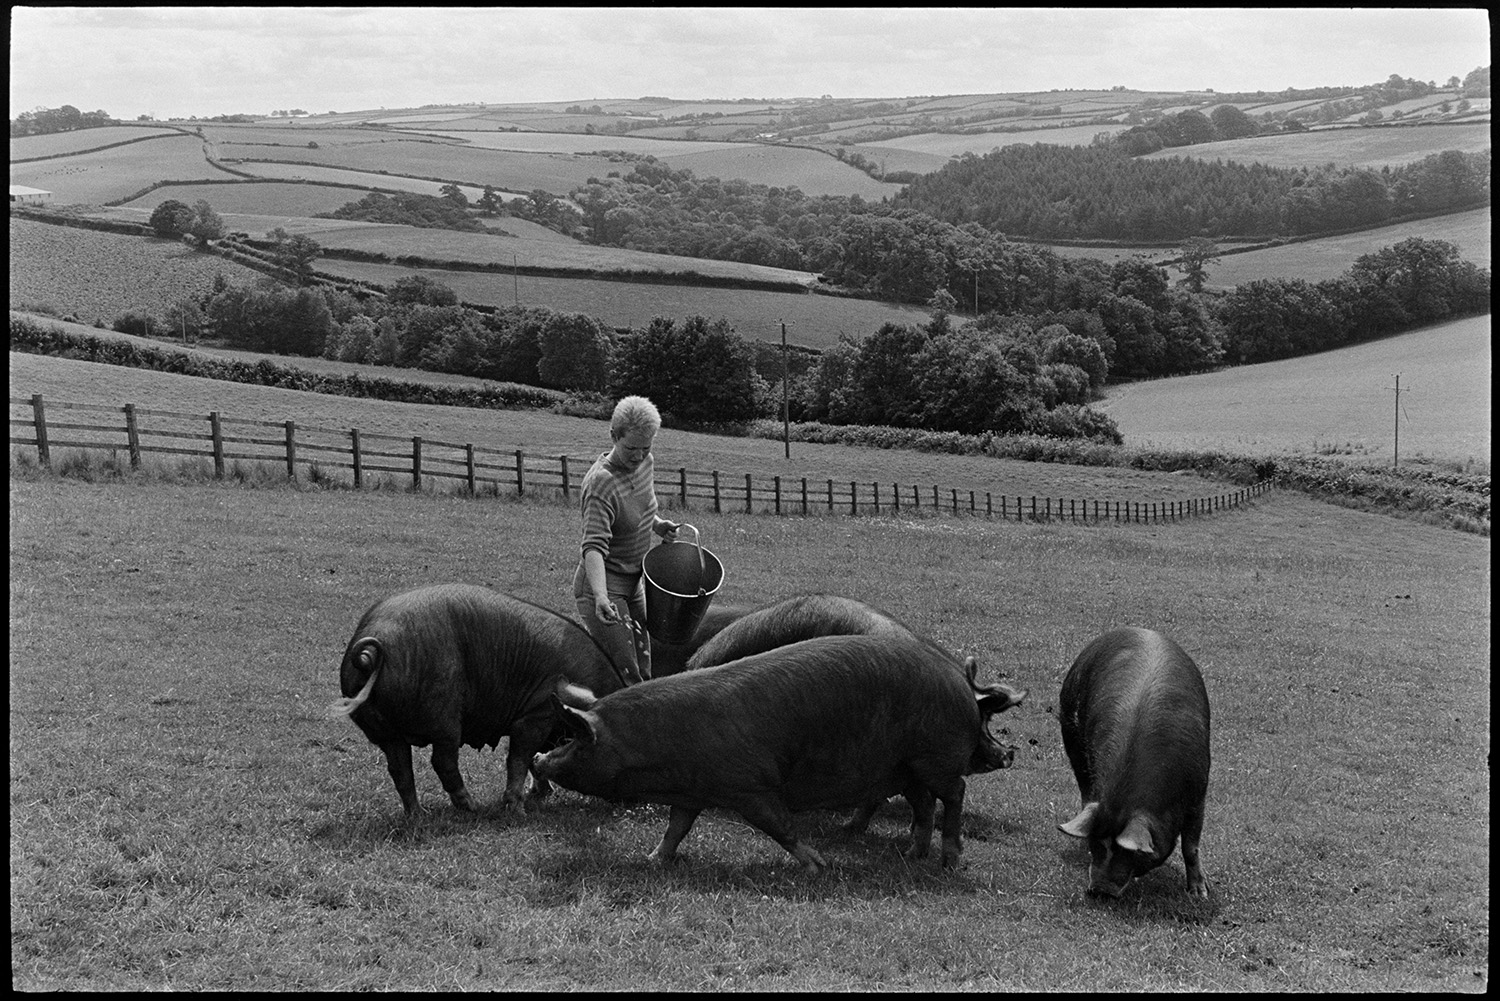 Woman farmer feeding Chinese pigs. 
[Anne Petch feeding Chinese pigs from a bucket, in a field at Heal Farm, Kings Nympton. A fence is running through the field to create partitions. A landscape with fields, trees and hedgerows can be seen in the background.]